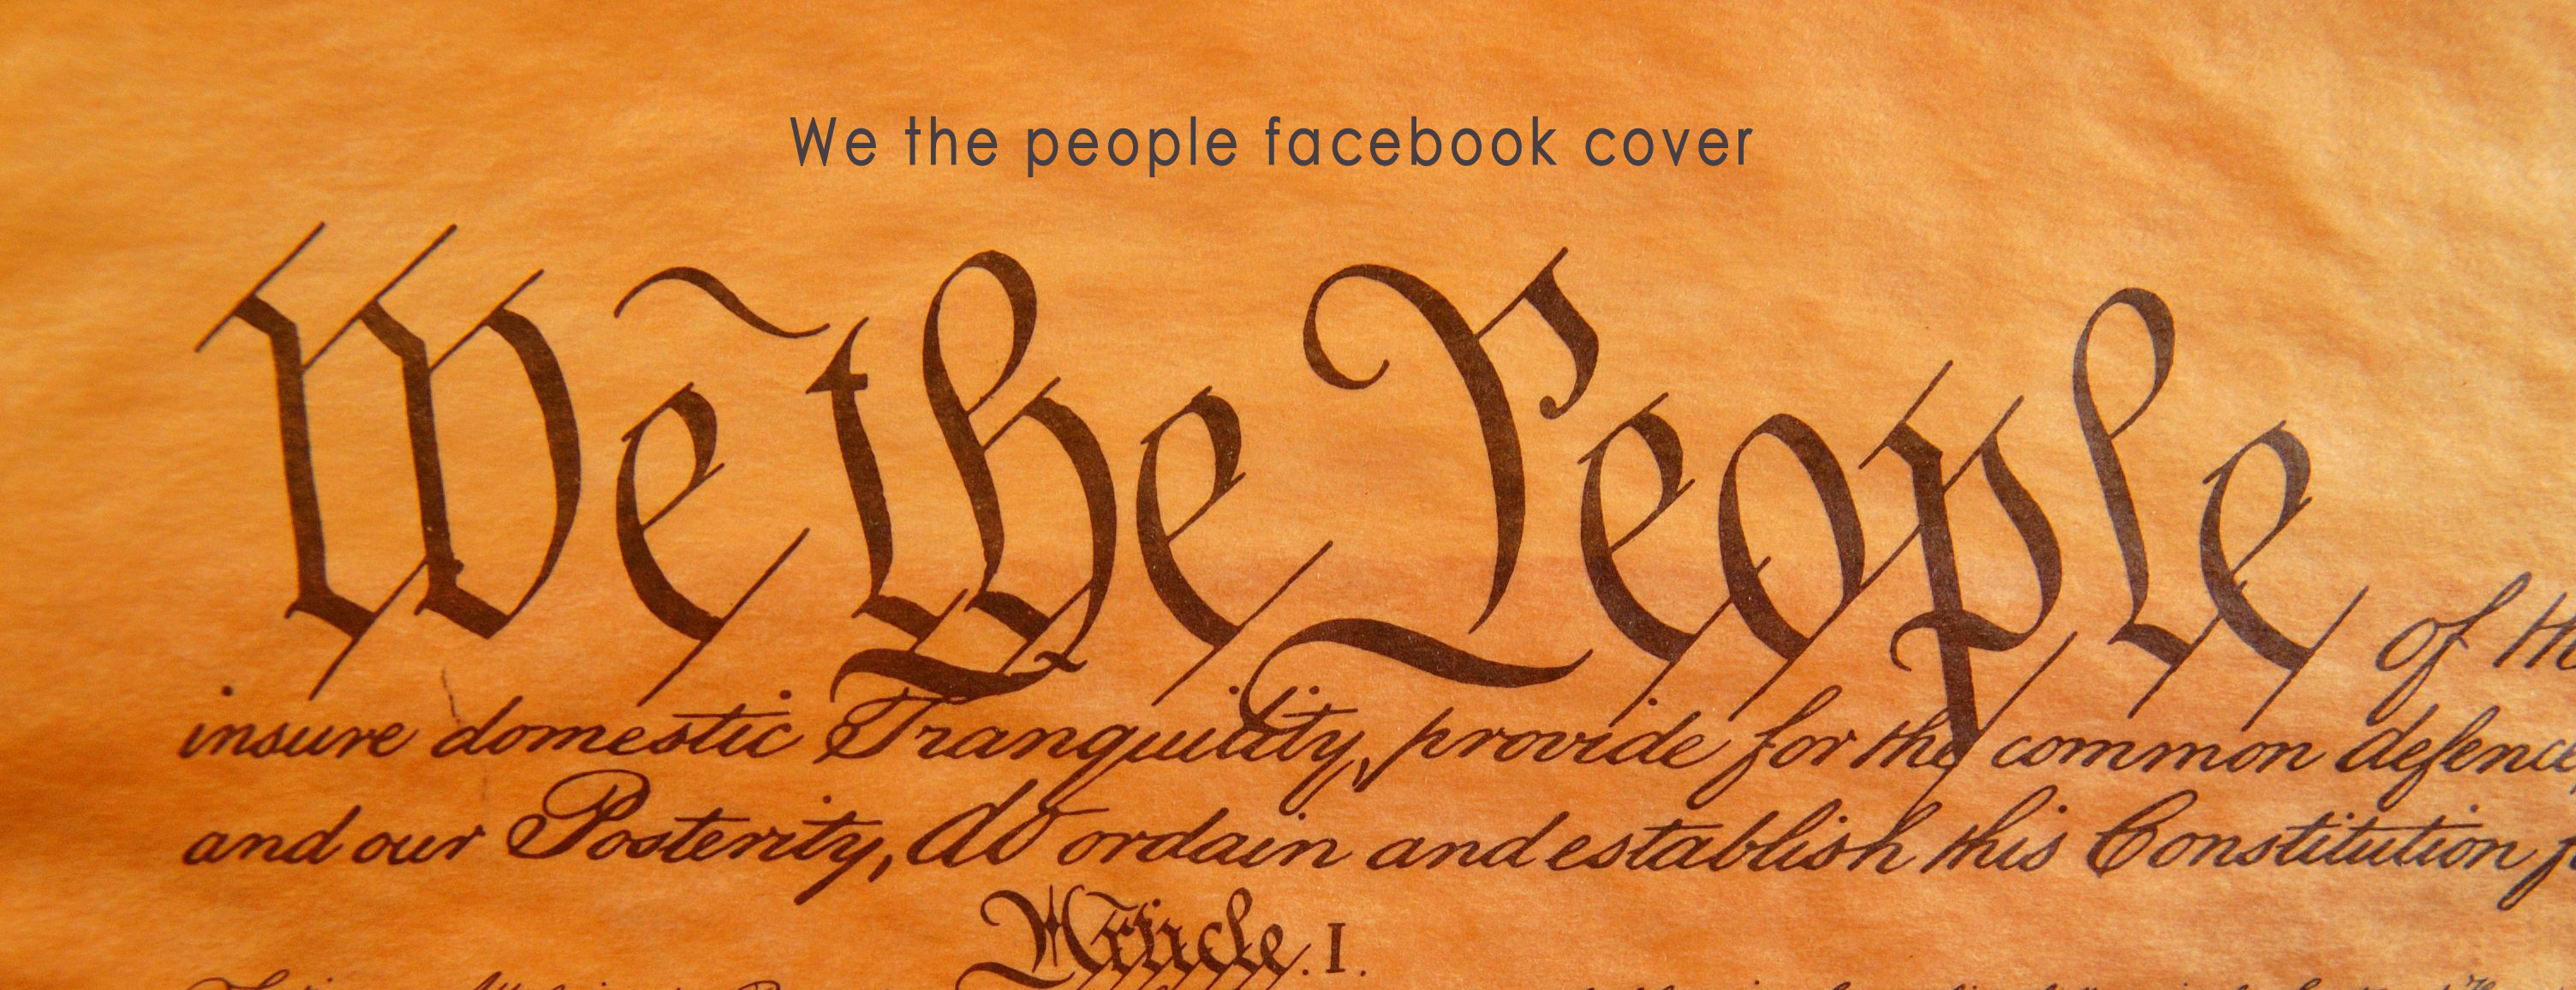 We the people facebook cover photo